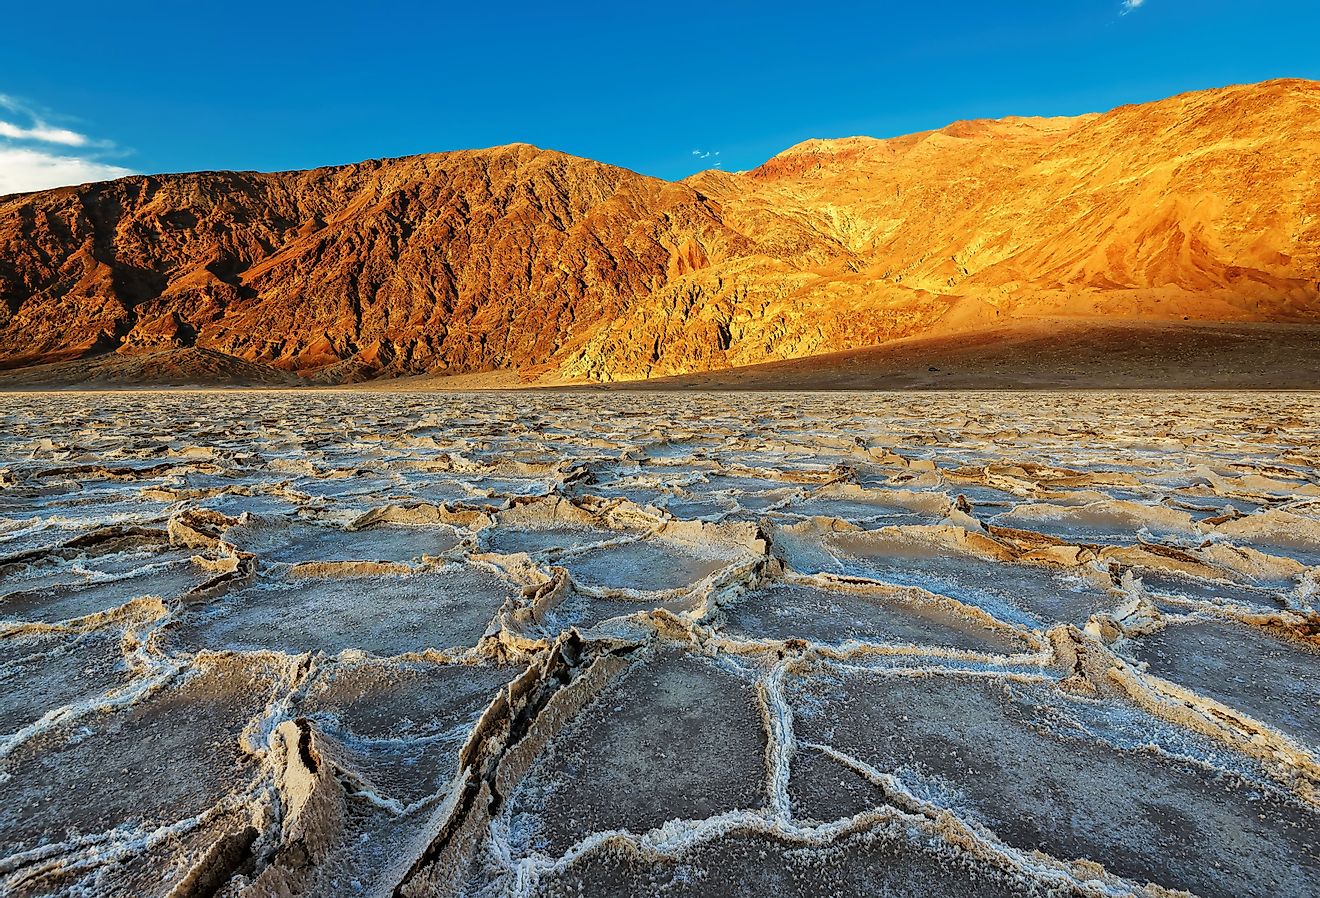 Badwater Basin at sunset in Death Valley National Park, California.